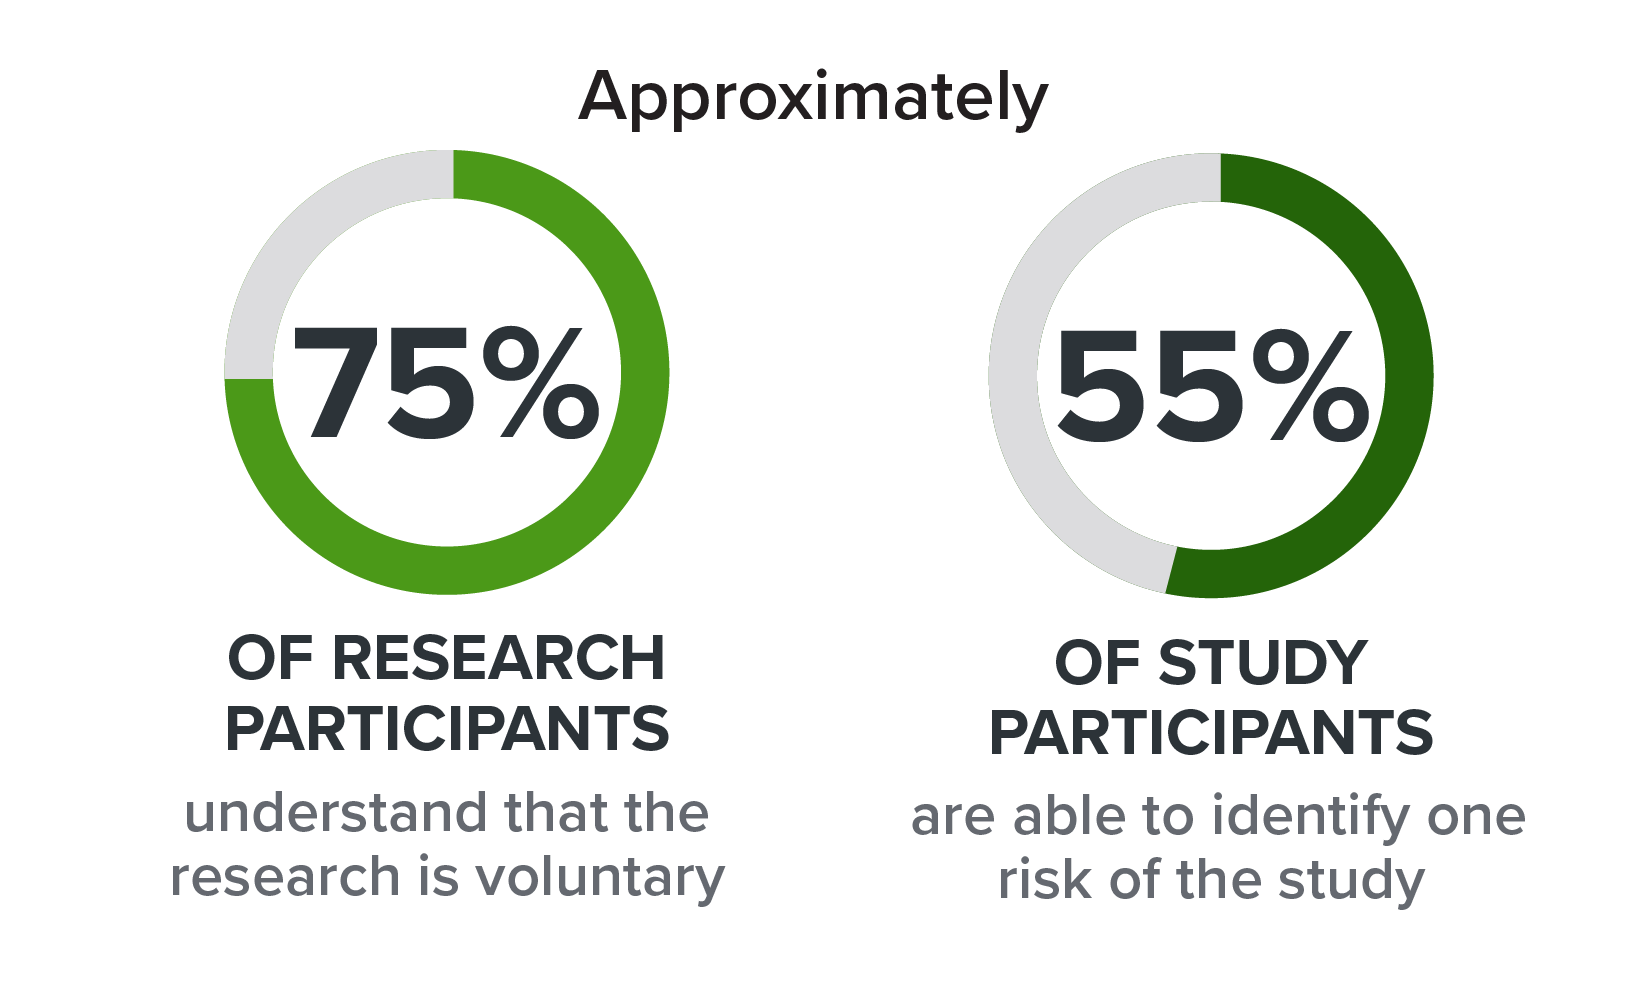 Approximately 75% of research participants understand that the research is voluntary and 55% of study participants are able to identify one risk of the study.